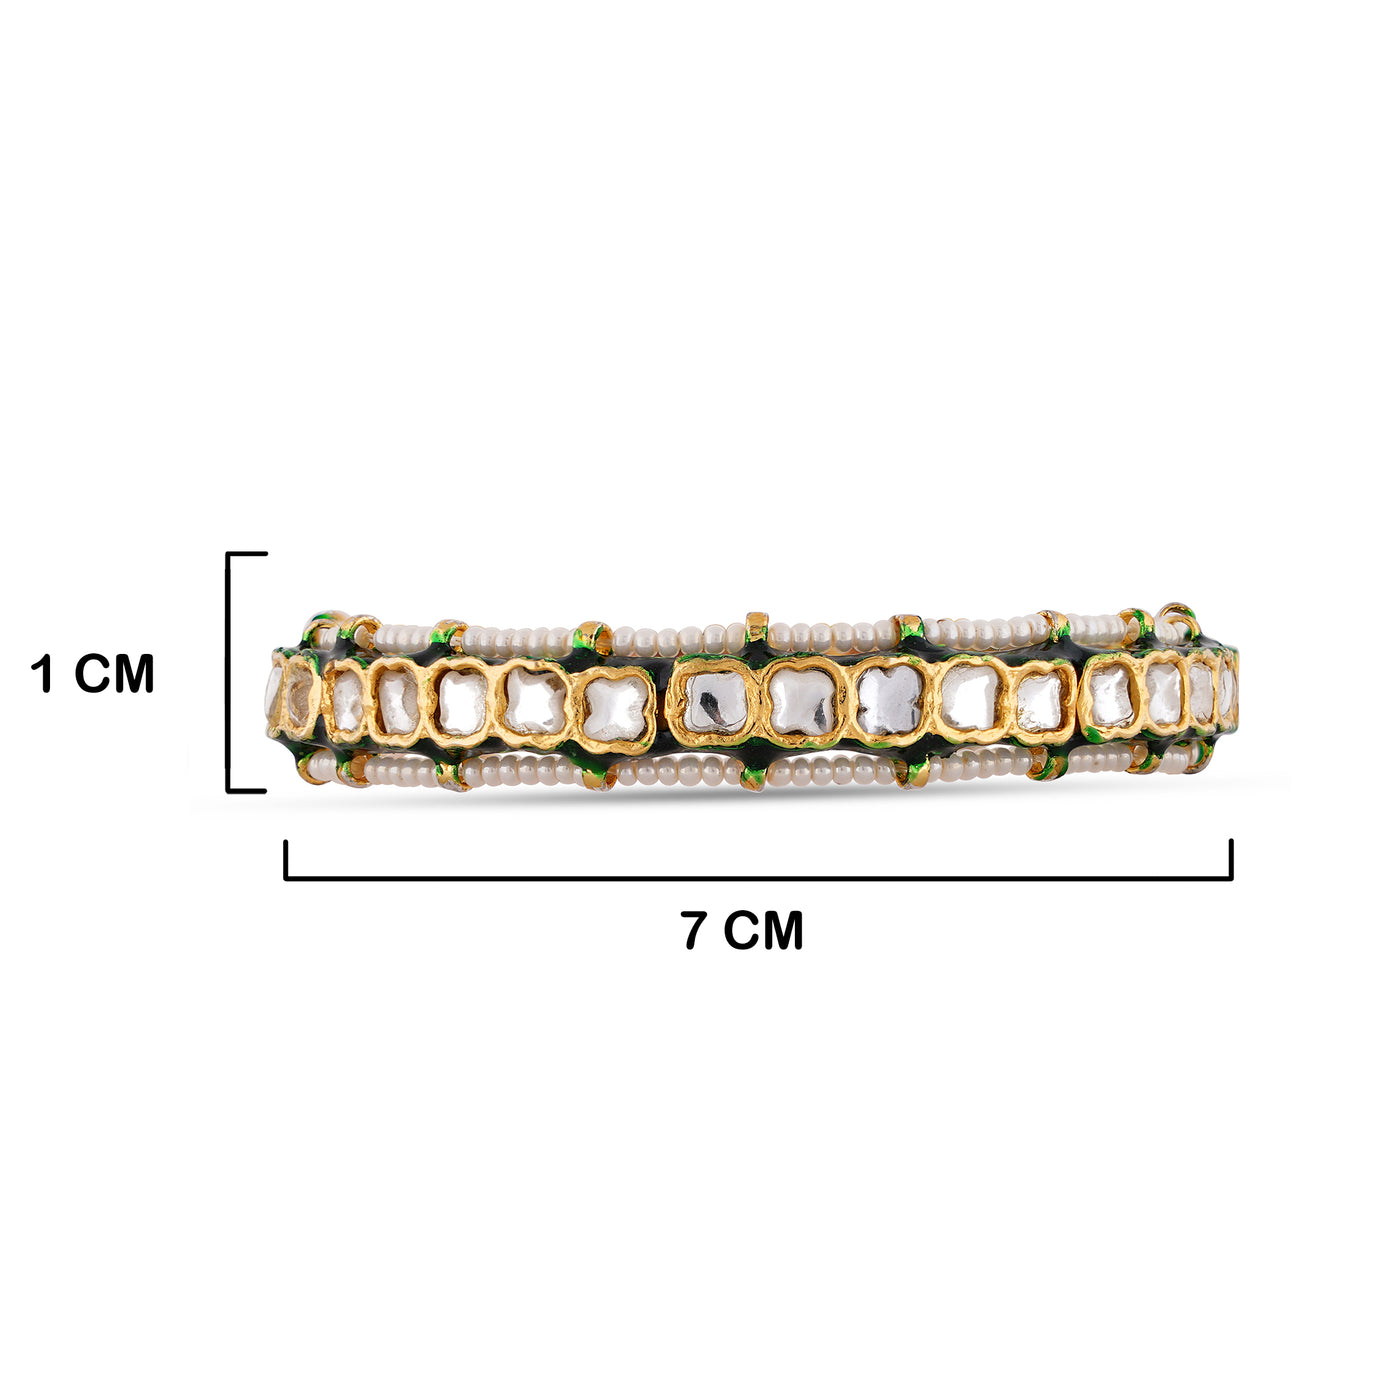  Pearled Meenakari Bangle with measurements in cm. 1cm by 7cm.